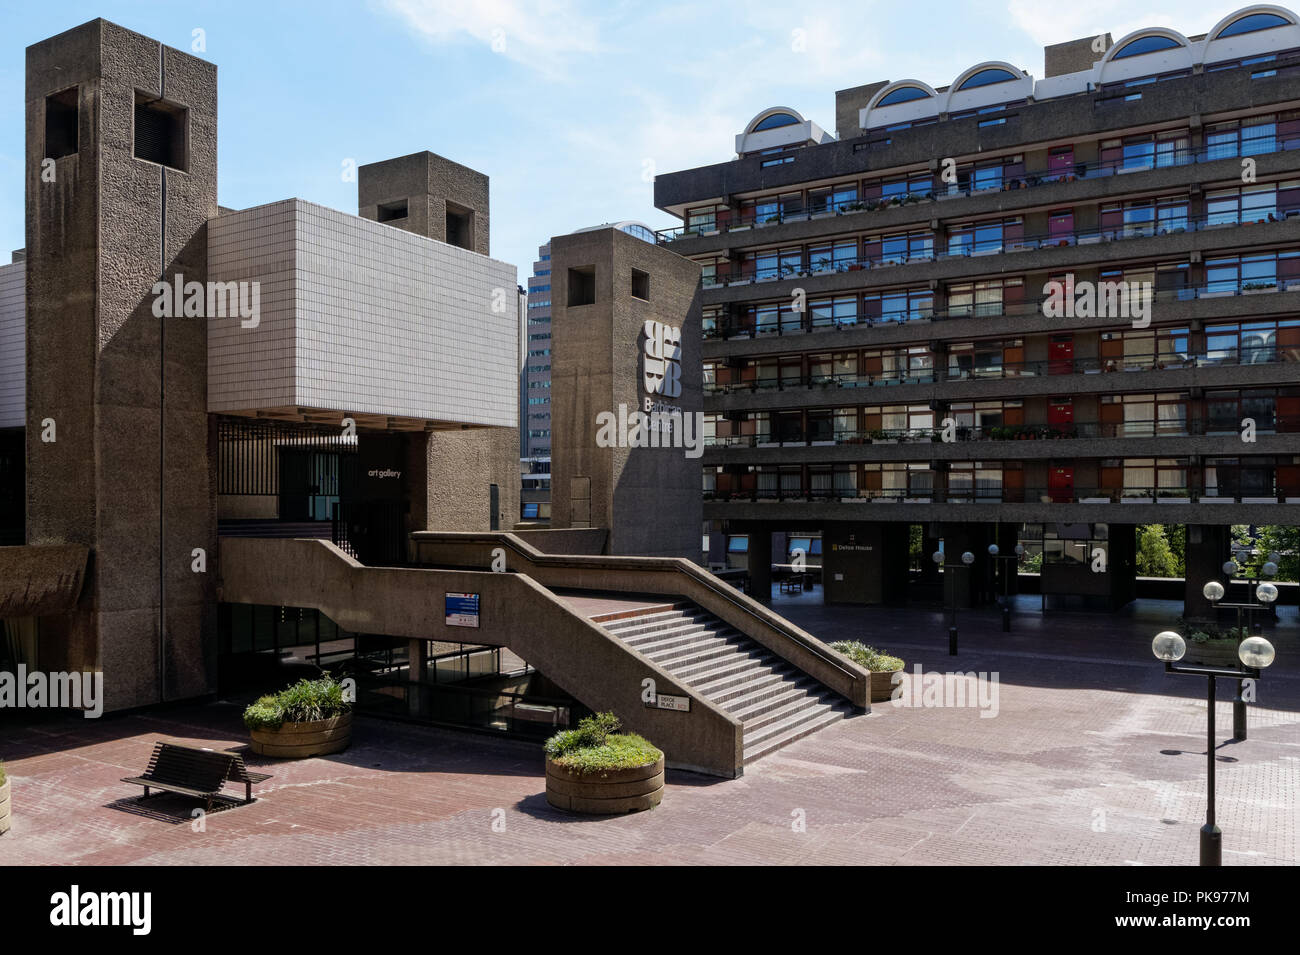 Brutalist architecture at the Barbican Centre in London, England United Kingdom UK Stock Photo